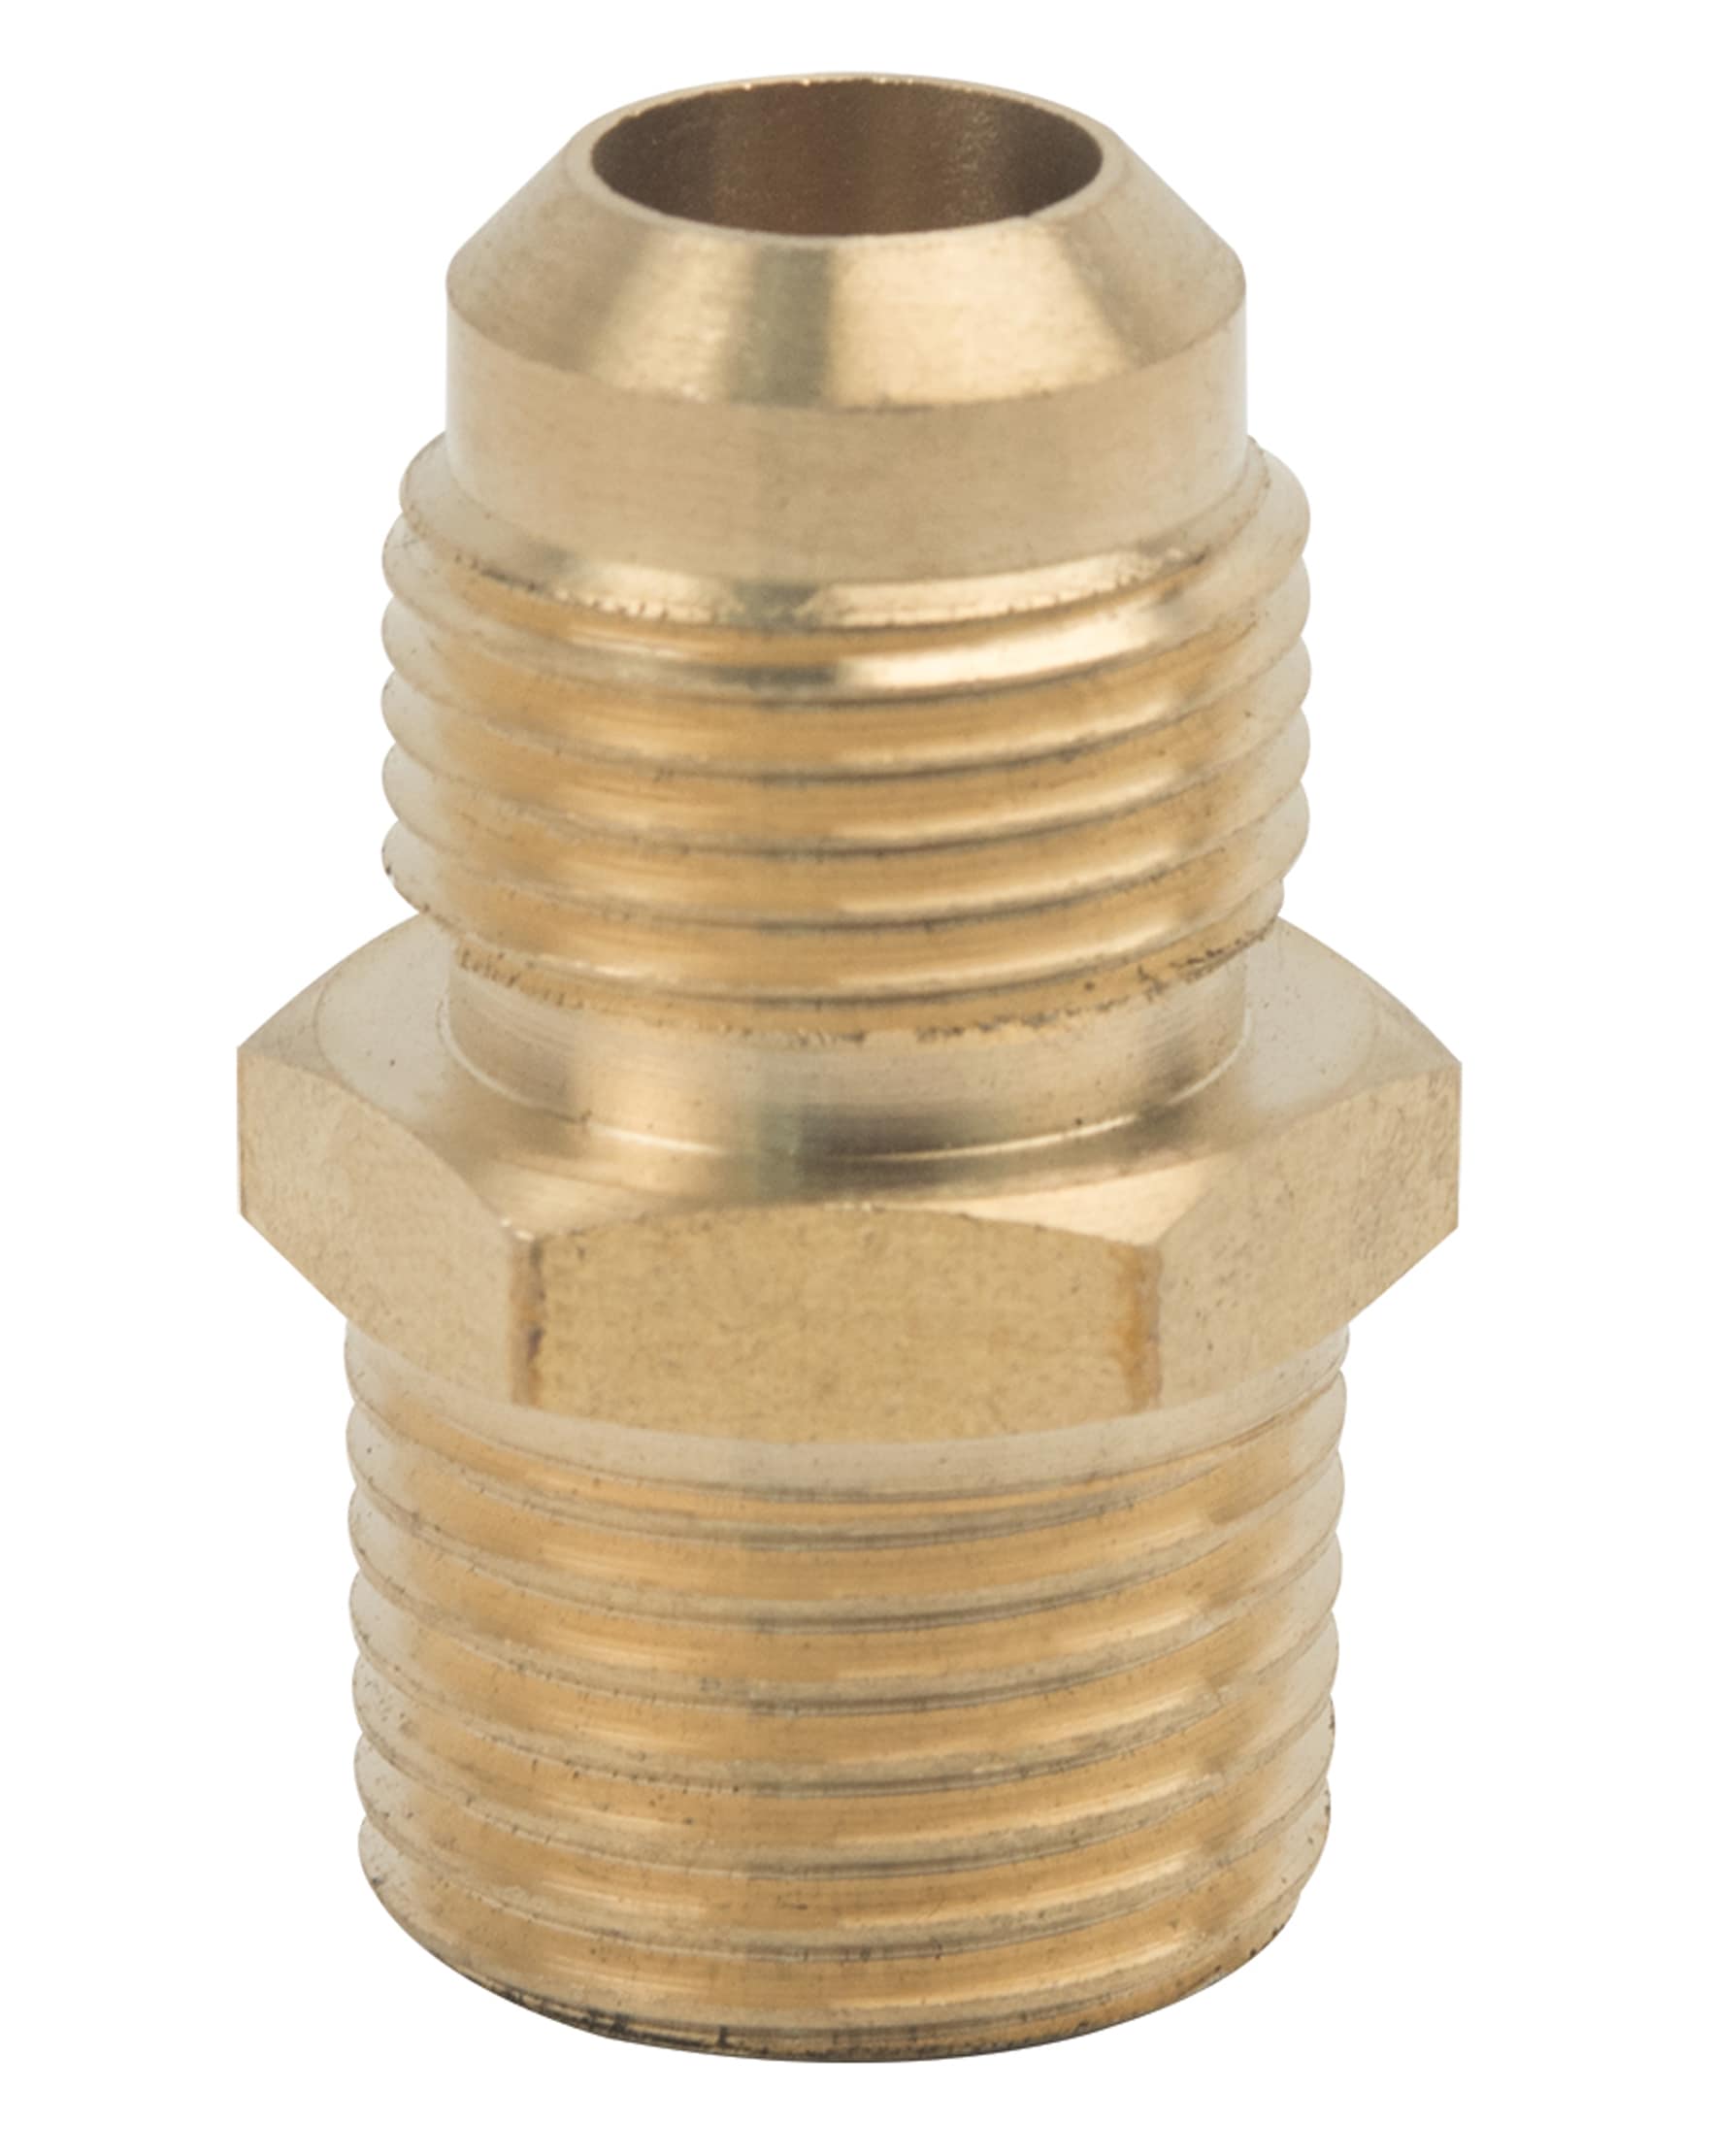 Brasscraft 1 2 In X 1 2 In Dia Threaded Flare X Mip Adapter Adapter Fitting In The Brass Fittings Department At Lowes Com